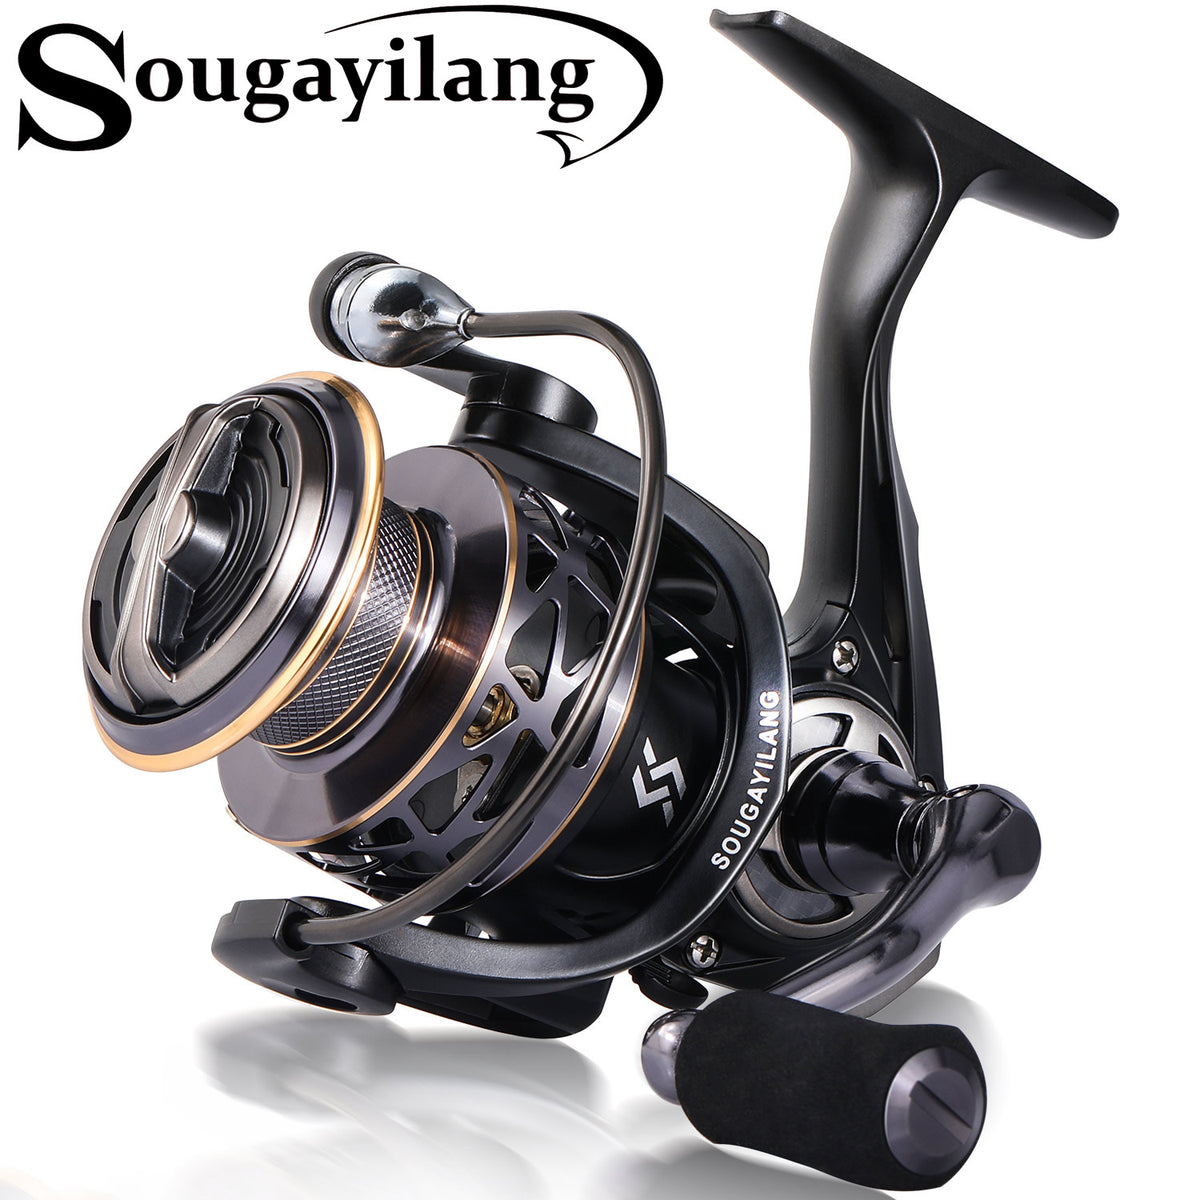 Sougayilang Spinning Reel - 6.2:1 High Speed Gear Ratio, Freshwater and  Saltwater Fishing Reel with 12+1 Shieled BB, Max Drag 35Lbs